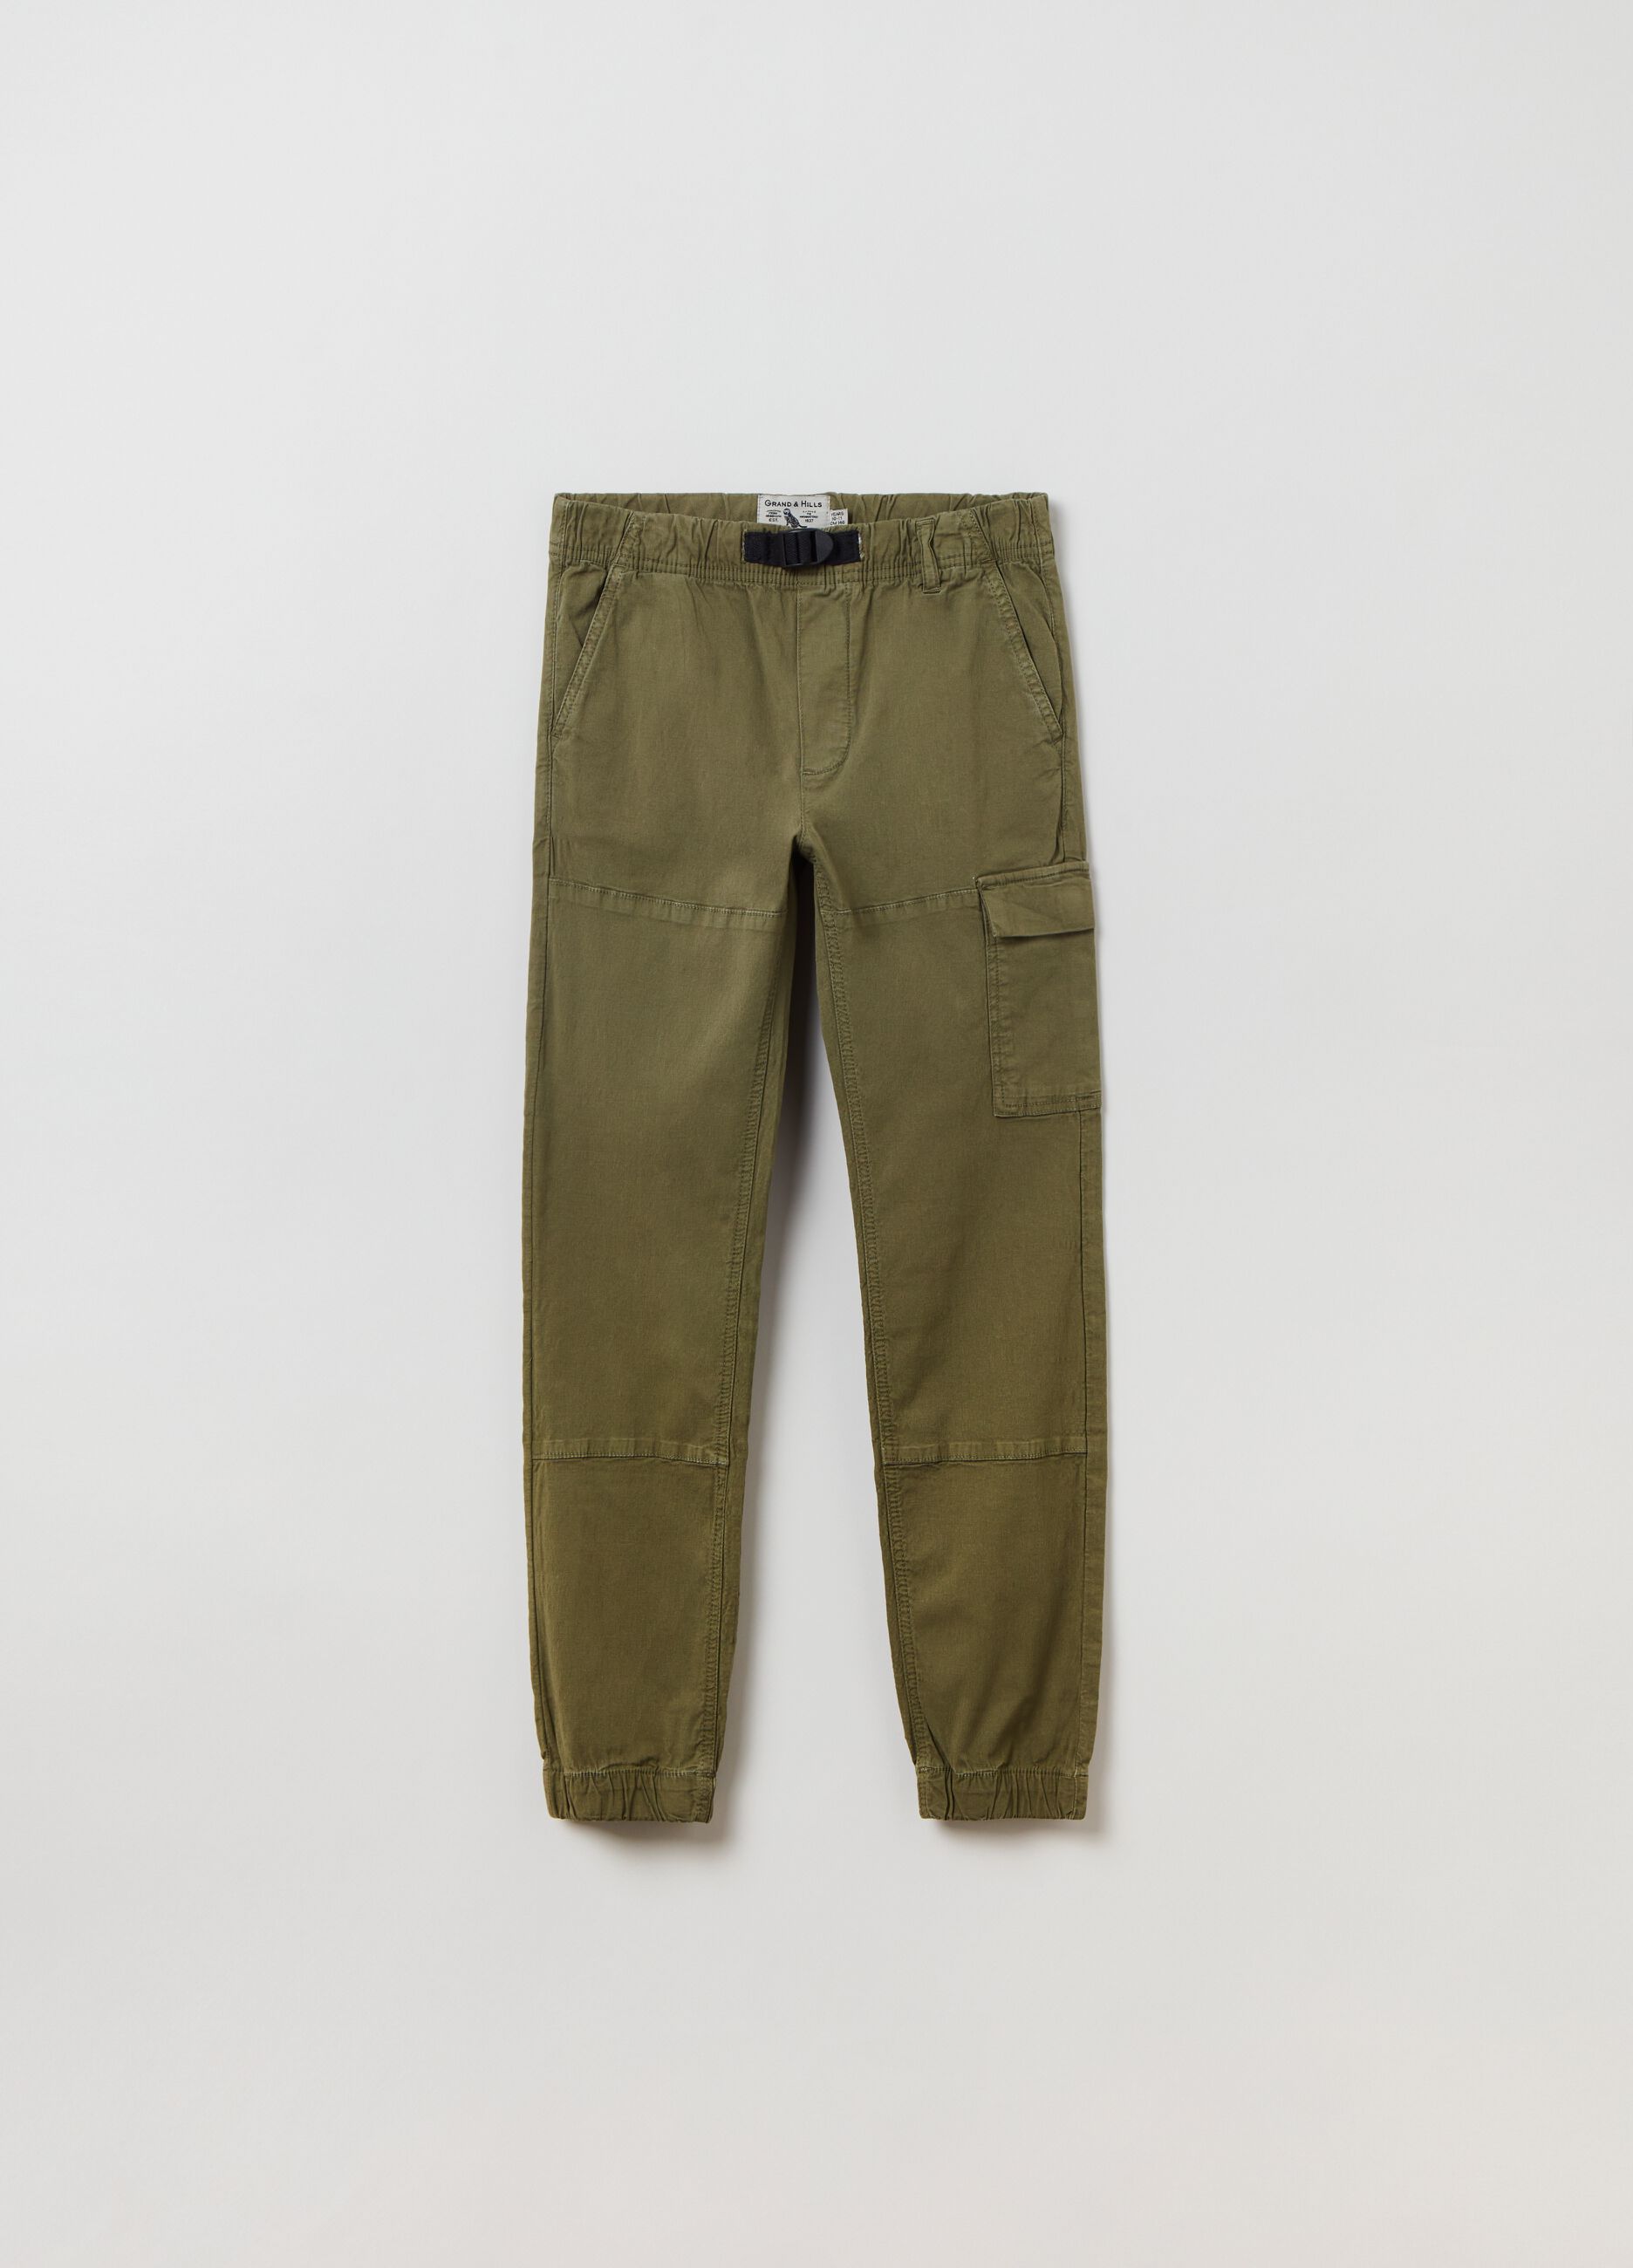 Grand&Hills joggers with drawstring